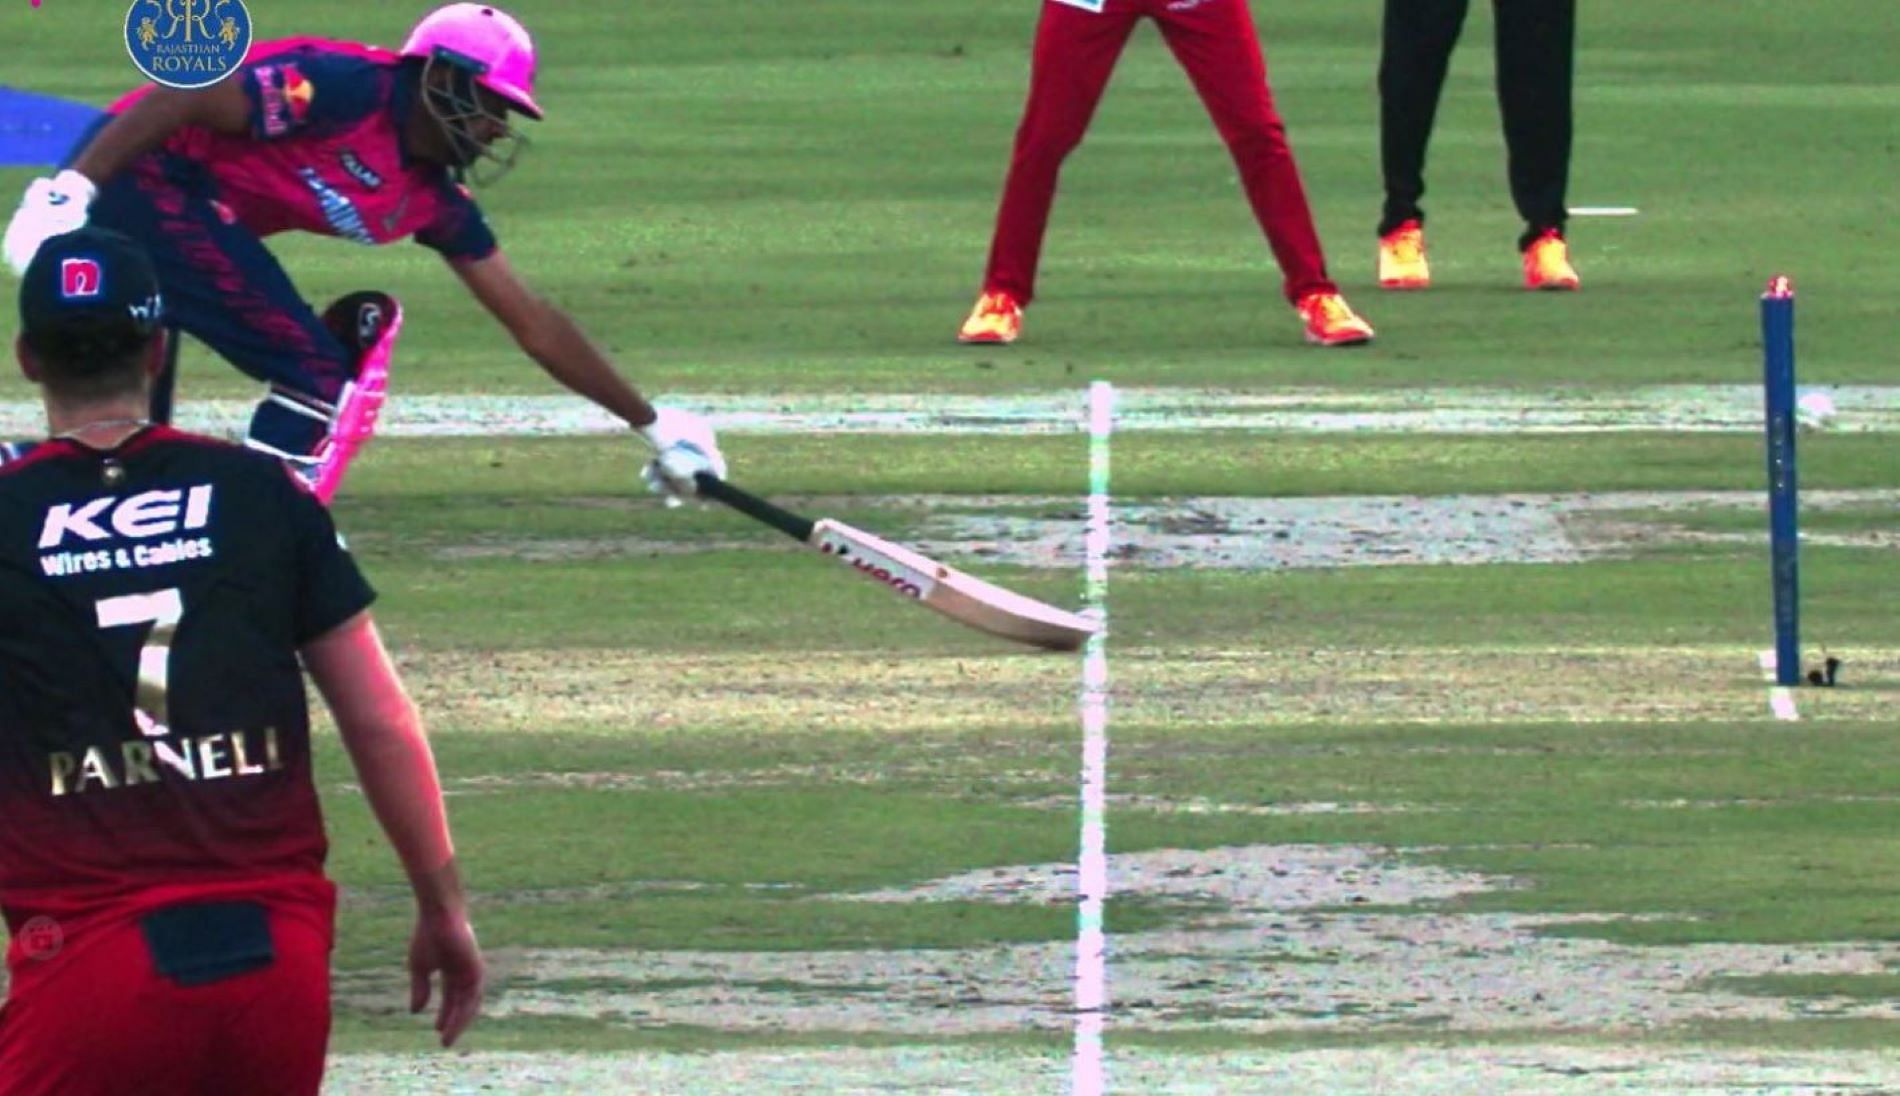 Ravichandran Ashwin was just short of the crease going for a second run against RCB